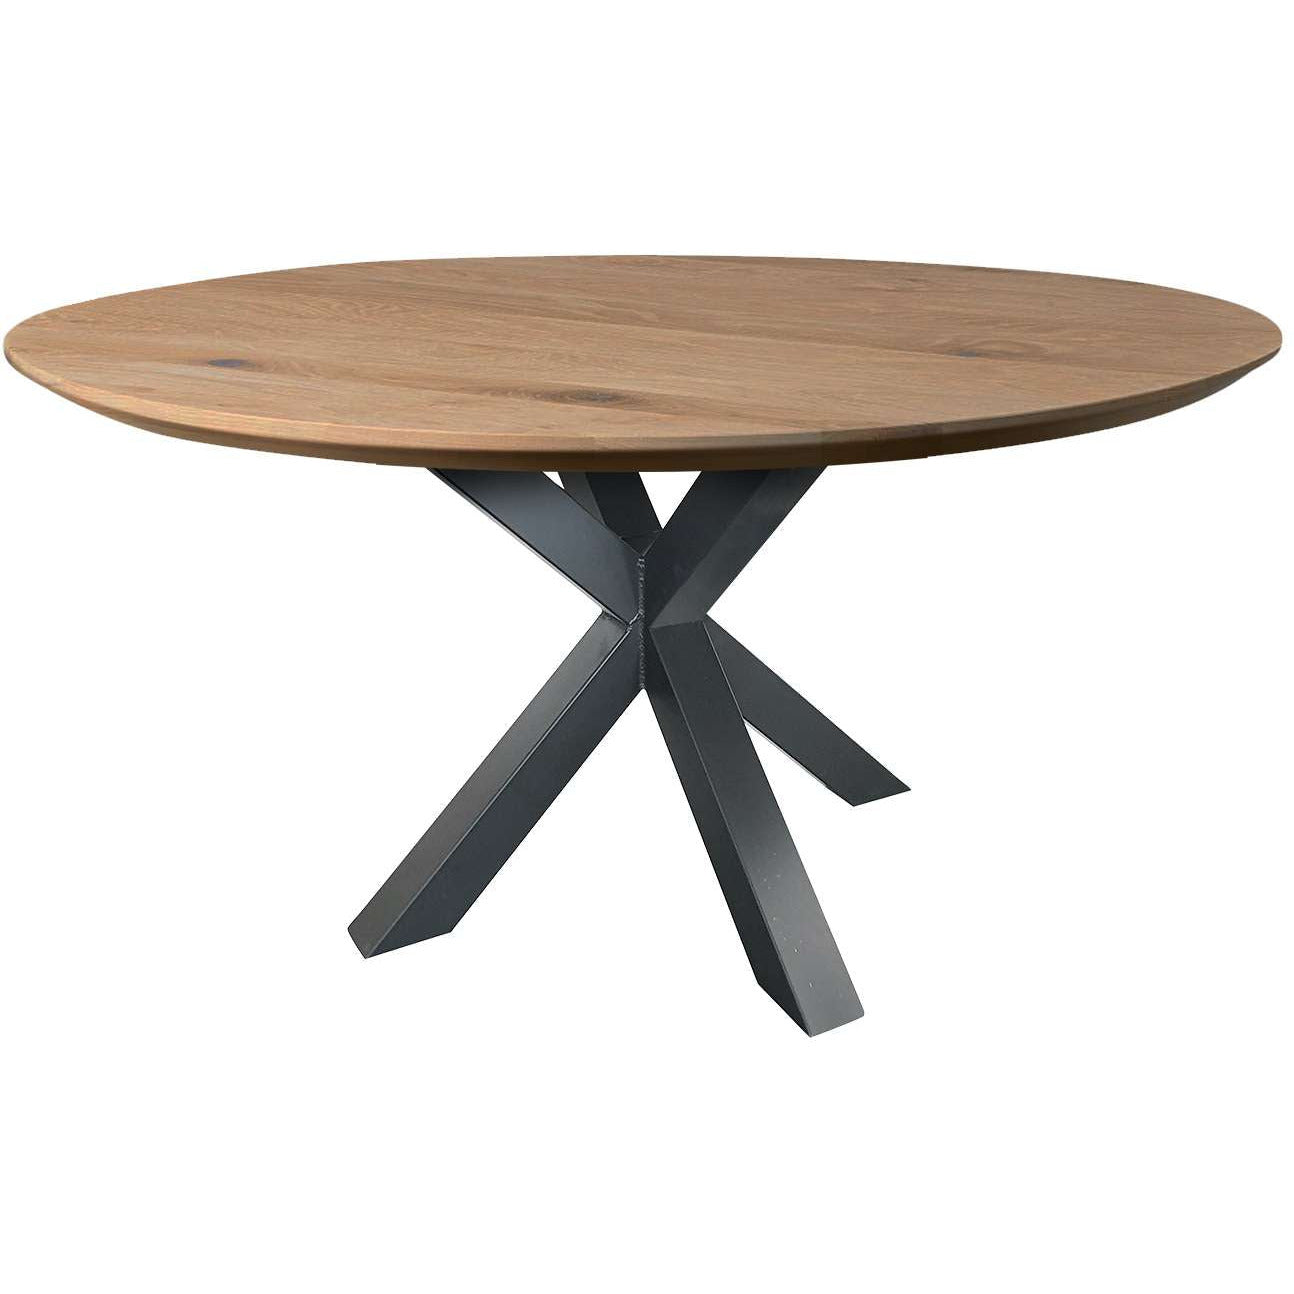 Dining table | Round | Natural | Oak wood | Lacquered Spider Leg |